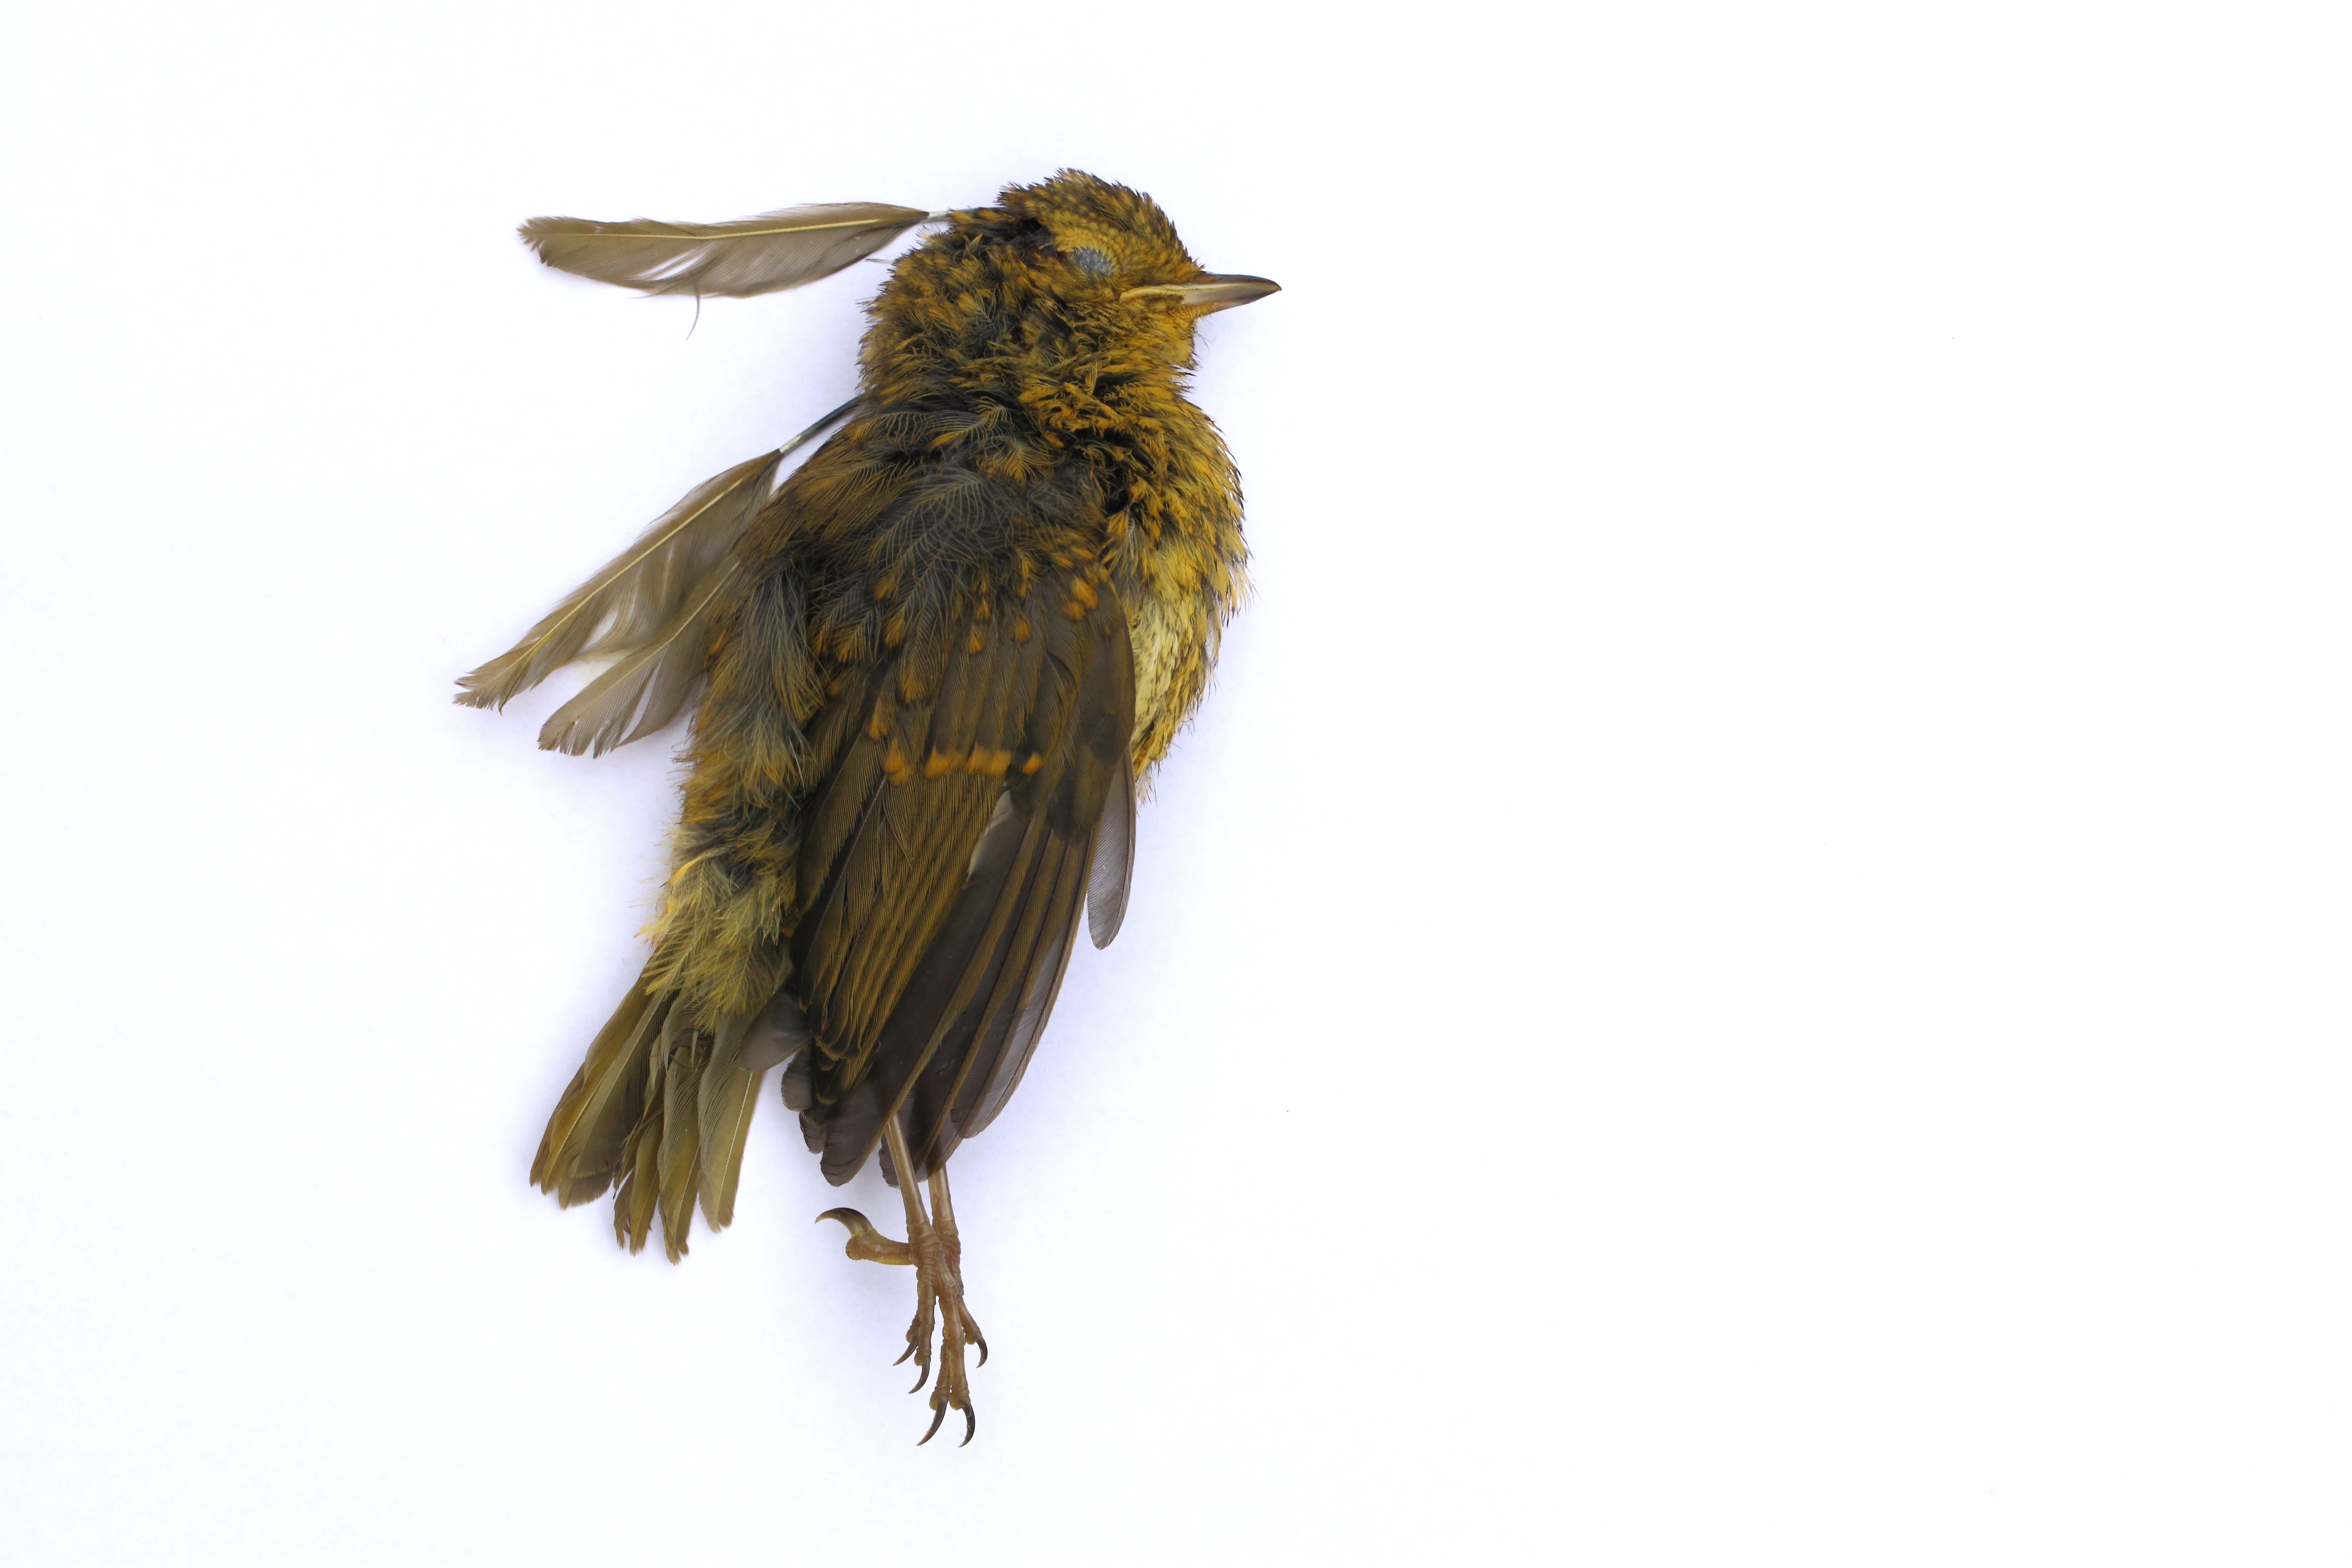 The Dignified Dead Bird Copyright Chris Bushe